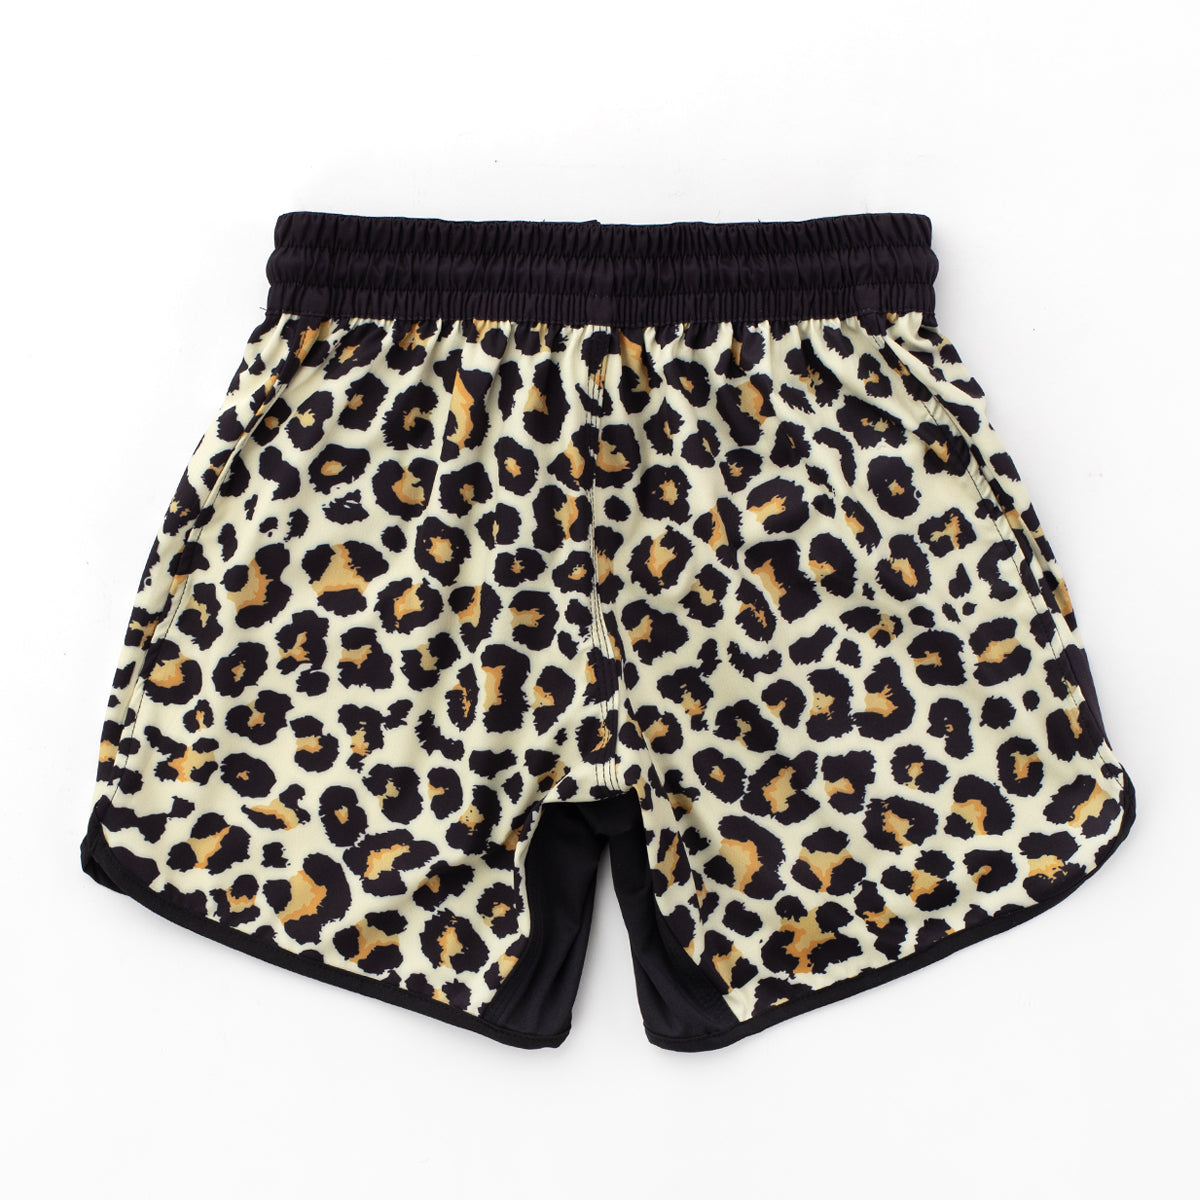 Tatami "Recharge" Fight Shorts - Leopard